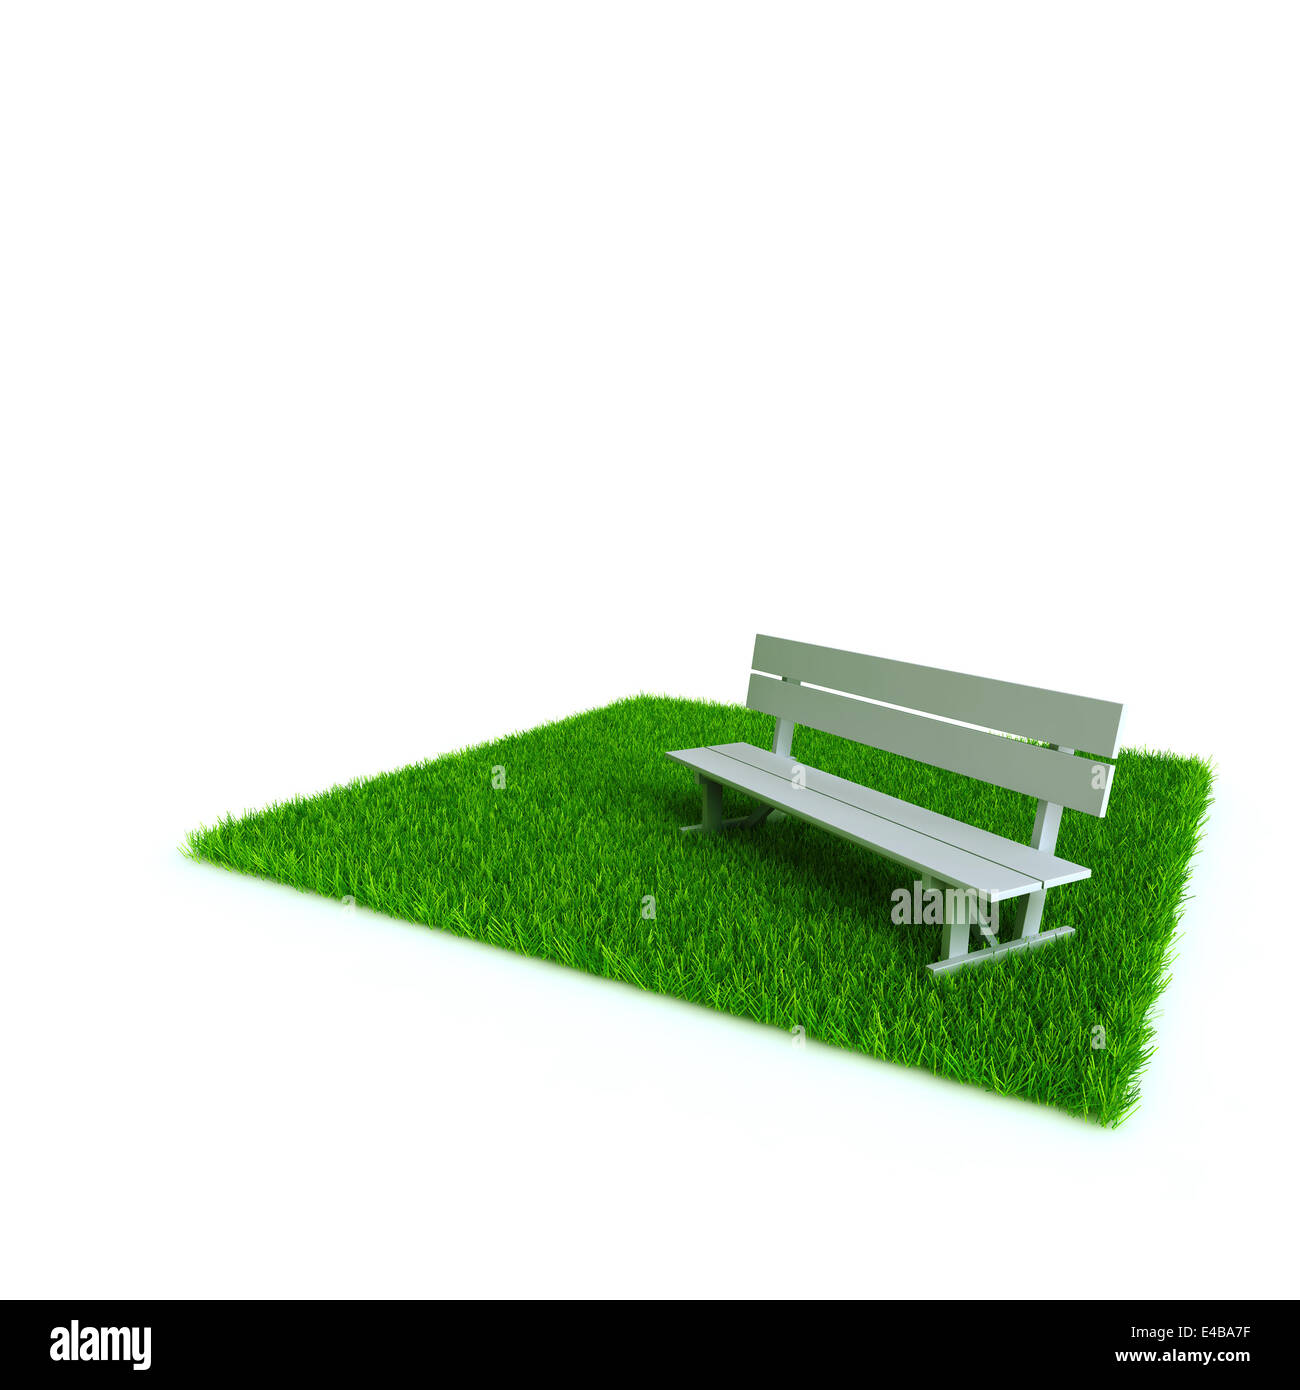 bench on a lawn from a green bright grass Stock Photo